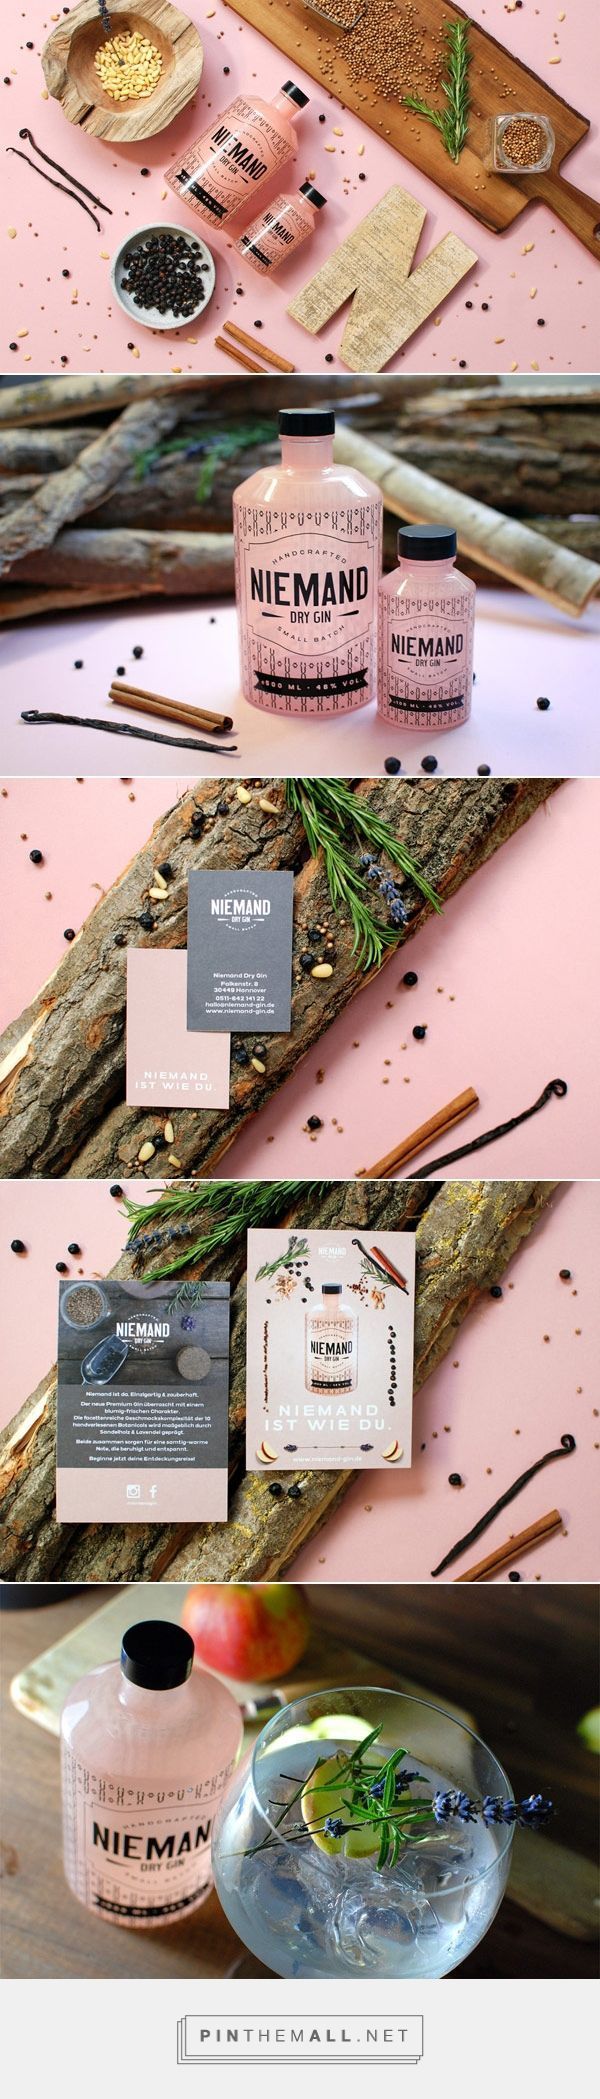 Niemand Dry Gin – Corporate Identity by Qoop